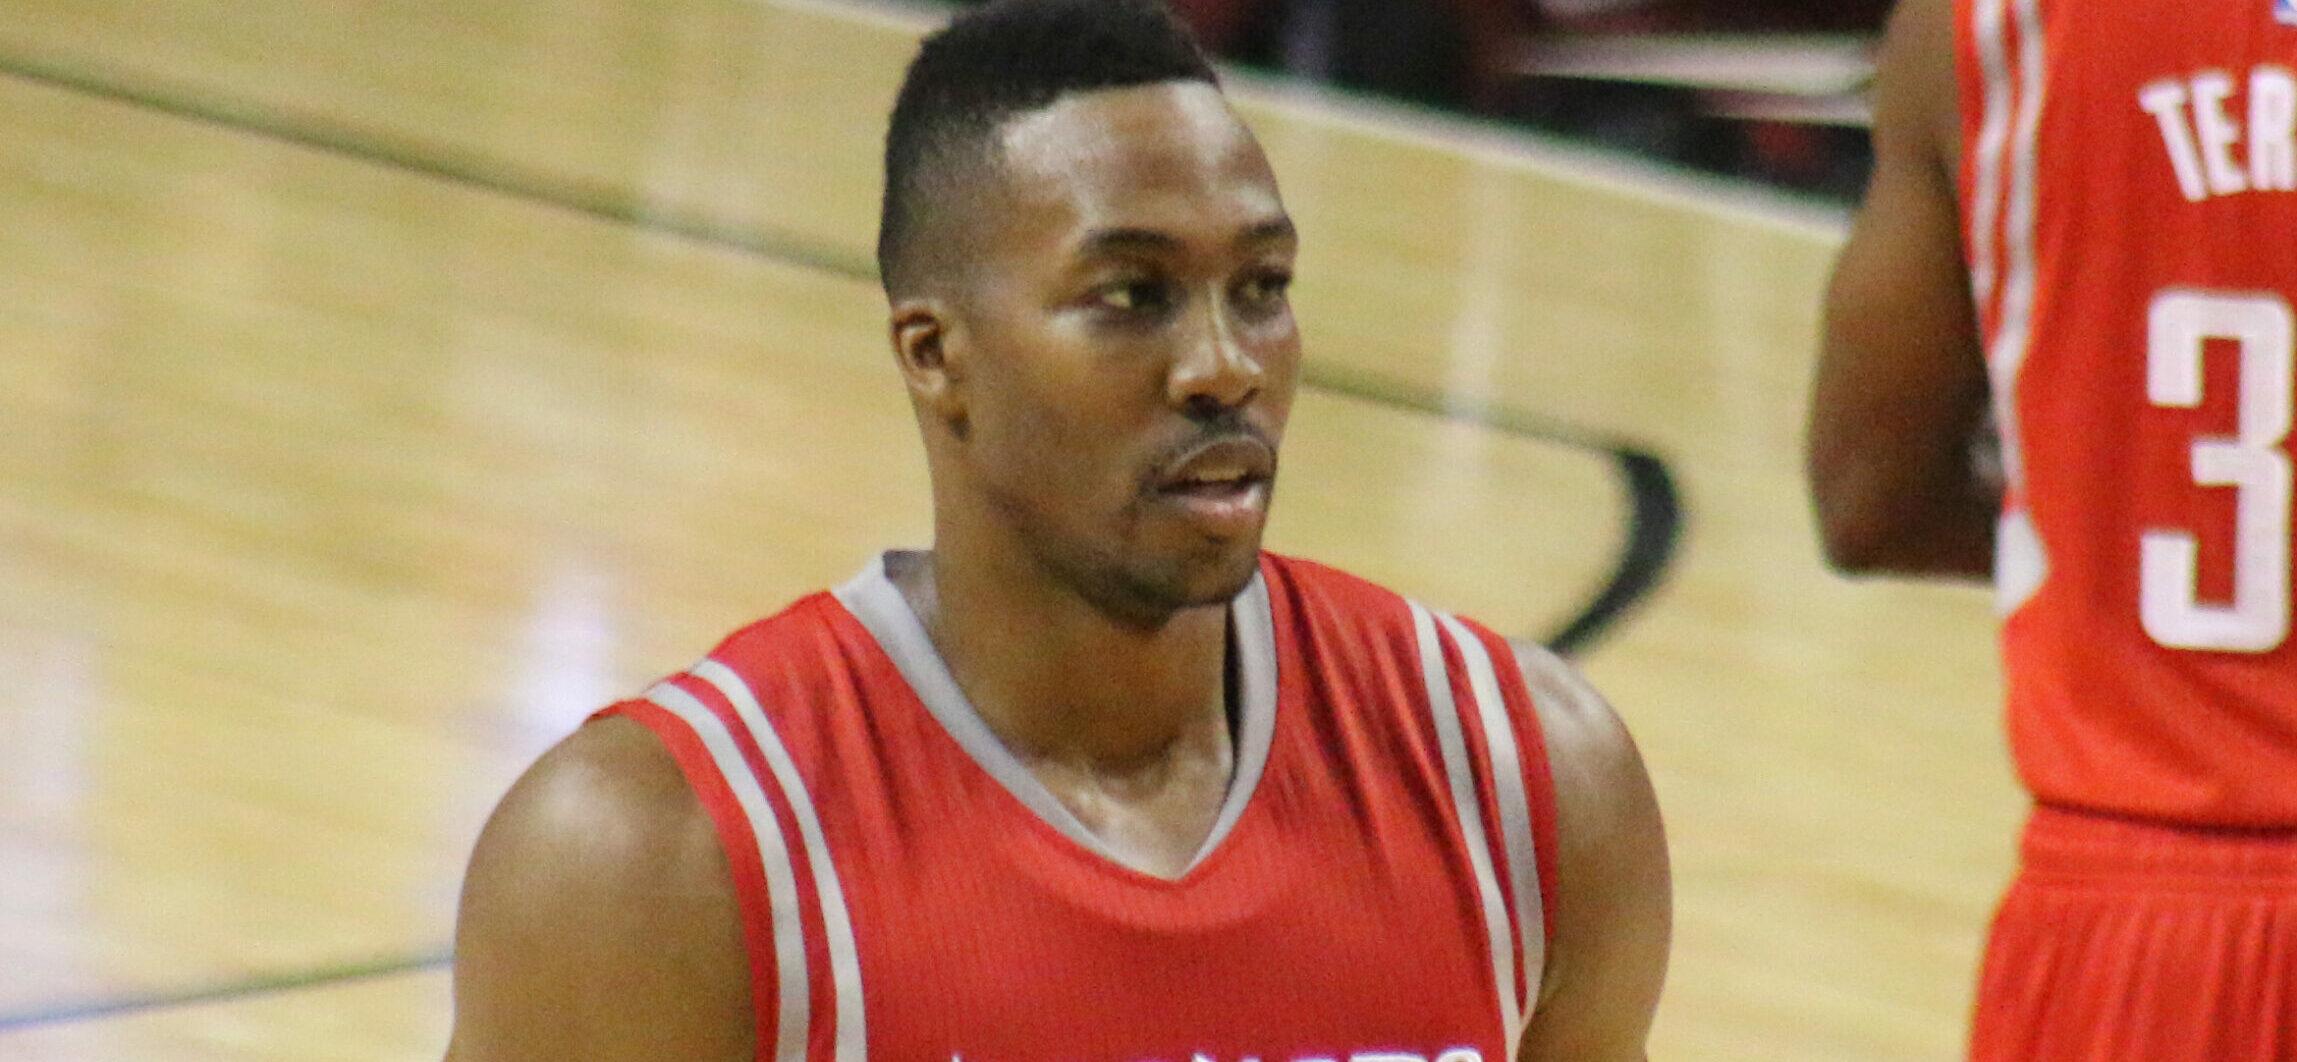 FILE IMAGES Dwight Howard allegedly Outed by Fame-Seeking Transgender